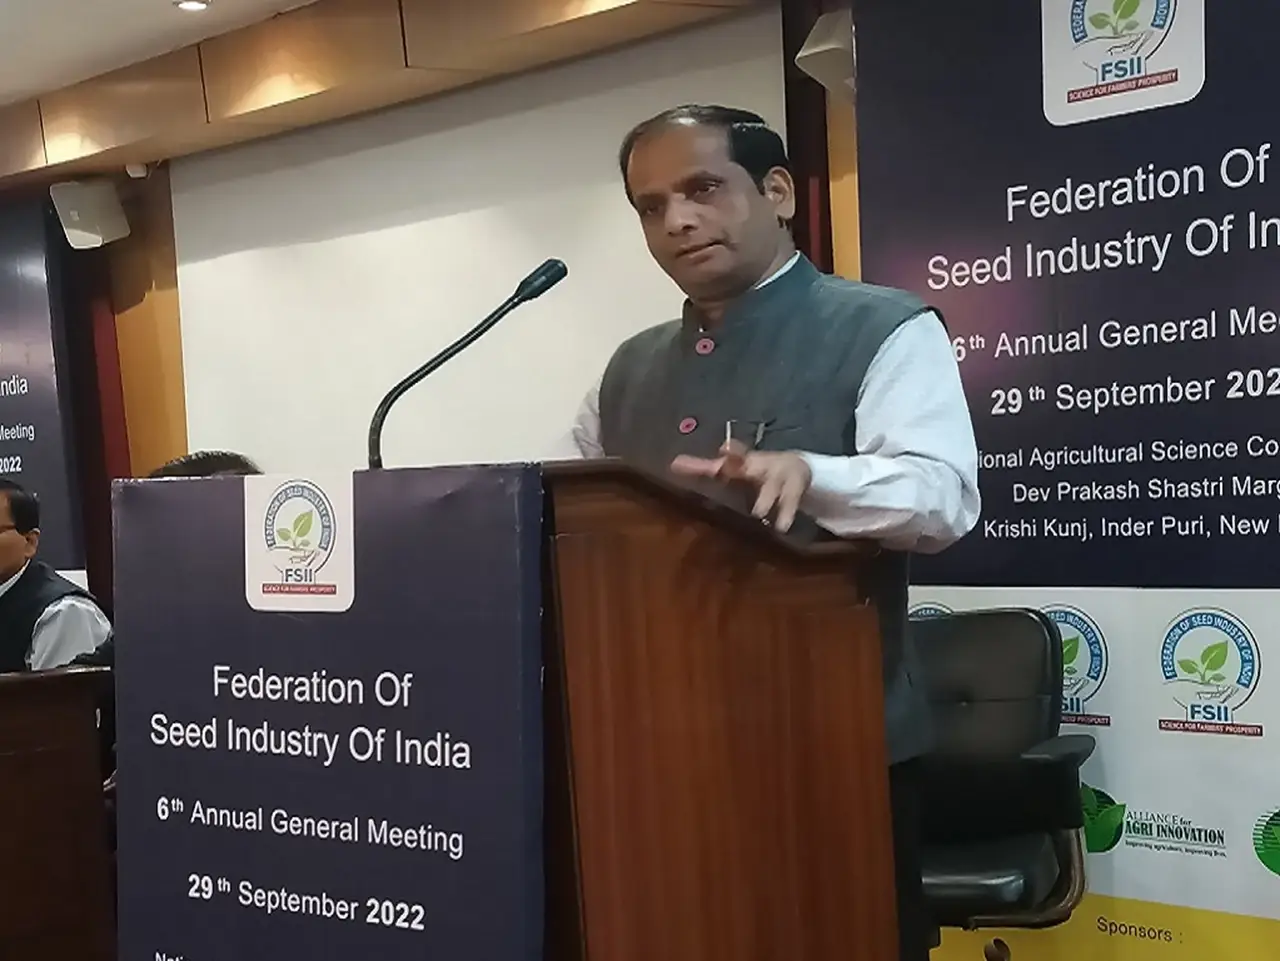 Dr. Himanshu Pathak, Secretary DARE & DG, ICAR was the chief guest of this event. (Photo Courtesy: Twitter FSII)